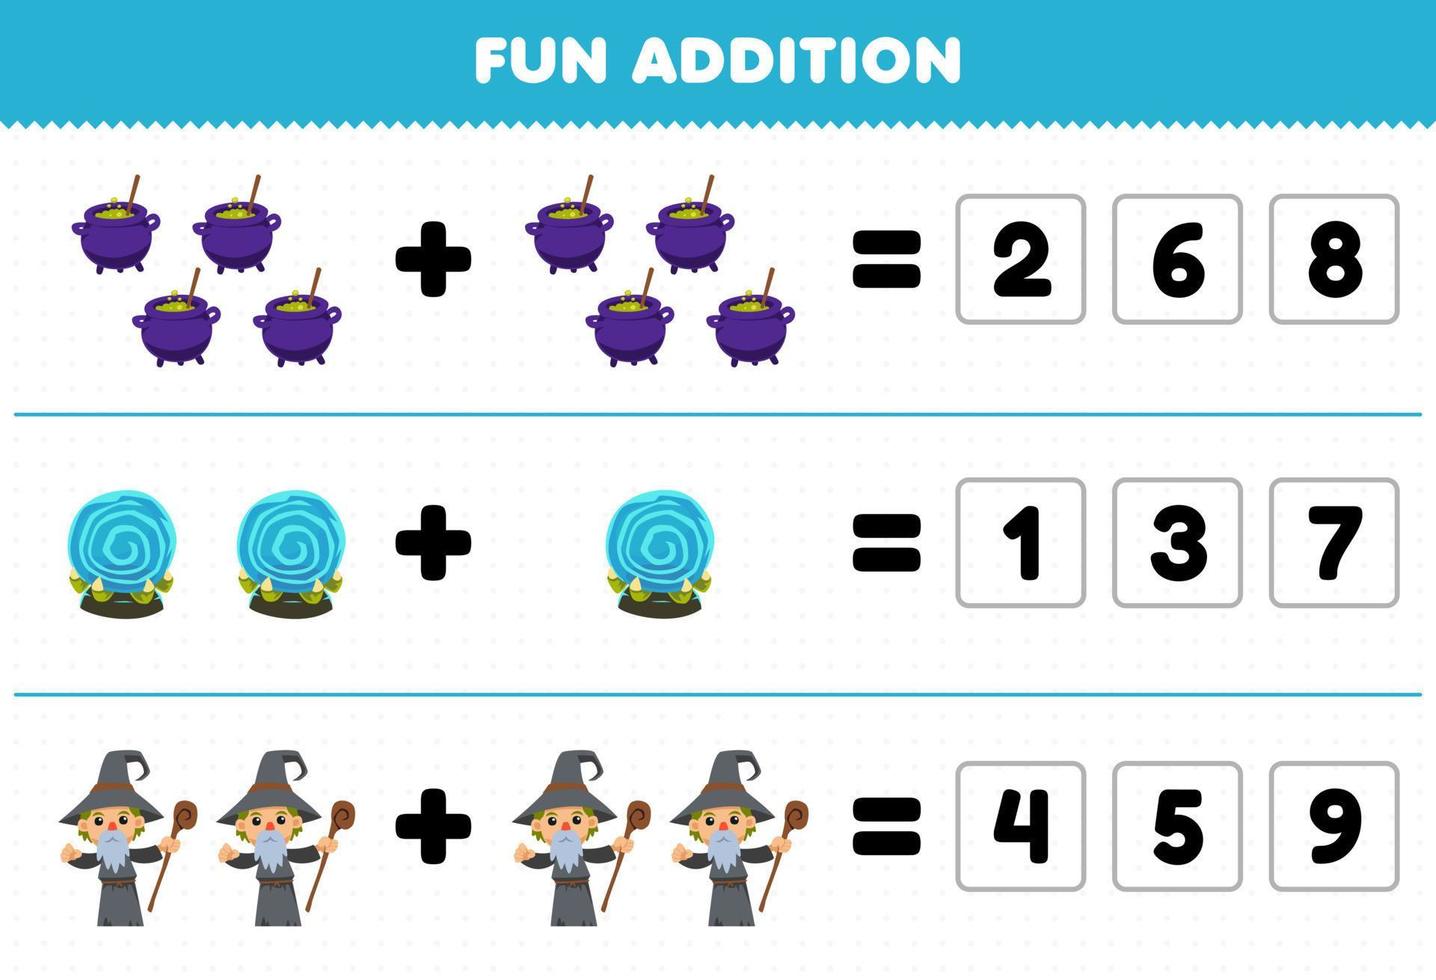 Education game for children fun addition by guess the correct number of cute cartoon cauldron magic orb wizard halloween printable worksheet vector